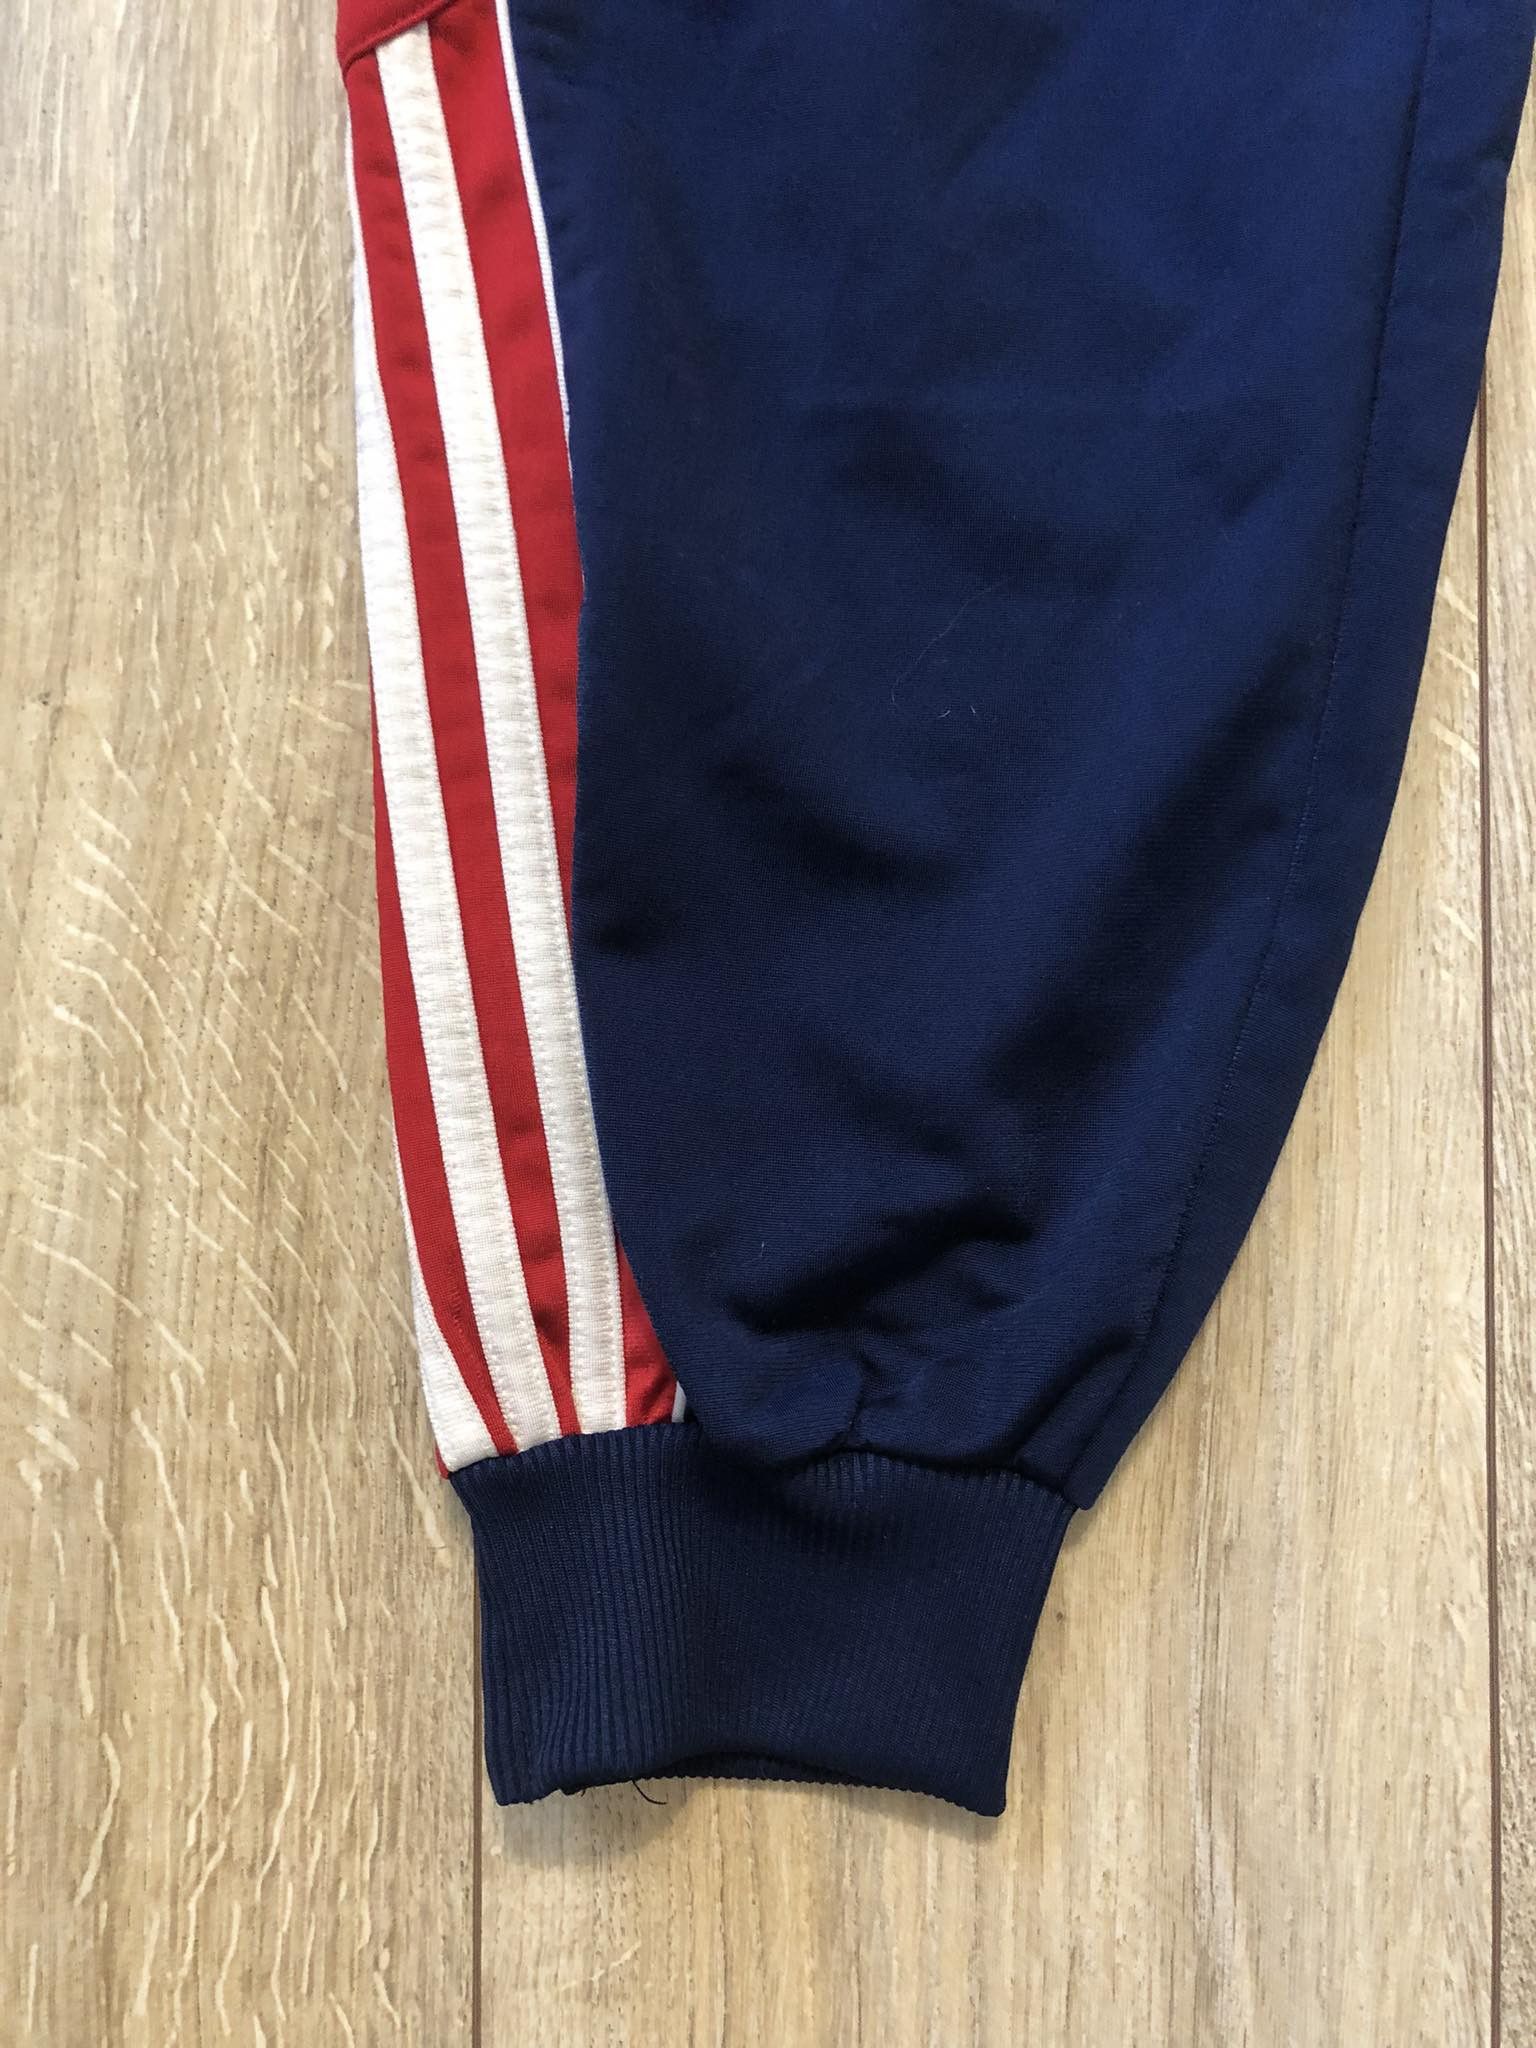 Adidas Adidas Olympia Toppen sweatpants vintage size M? 70s 80s Size US 32 / EU 48 - 2 Preview